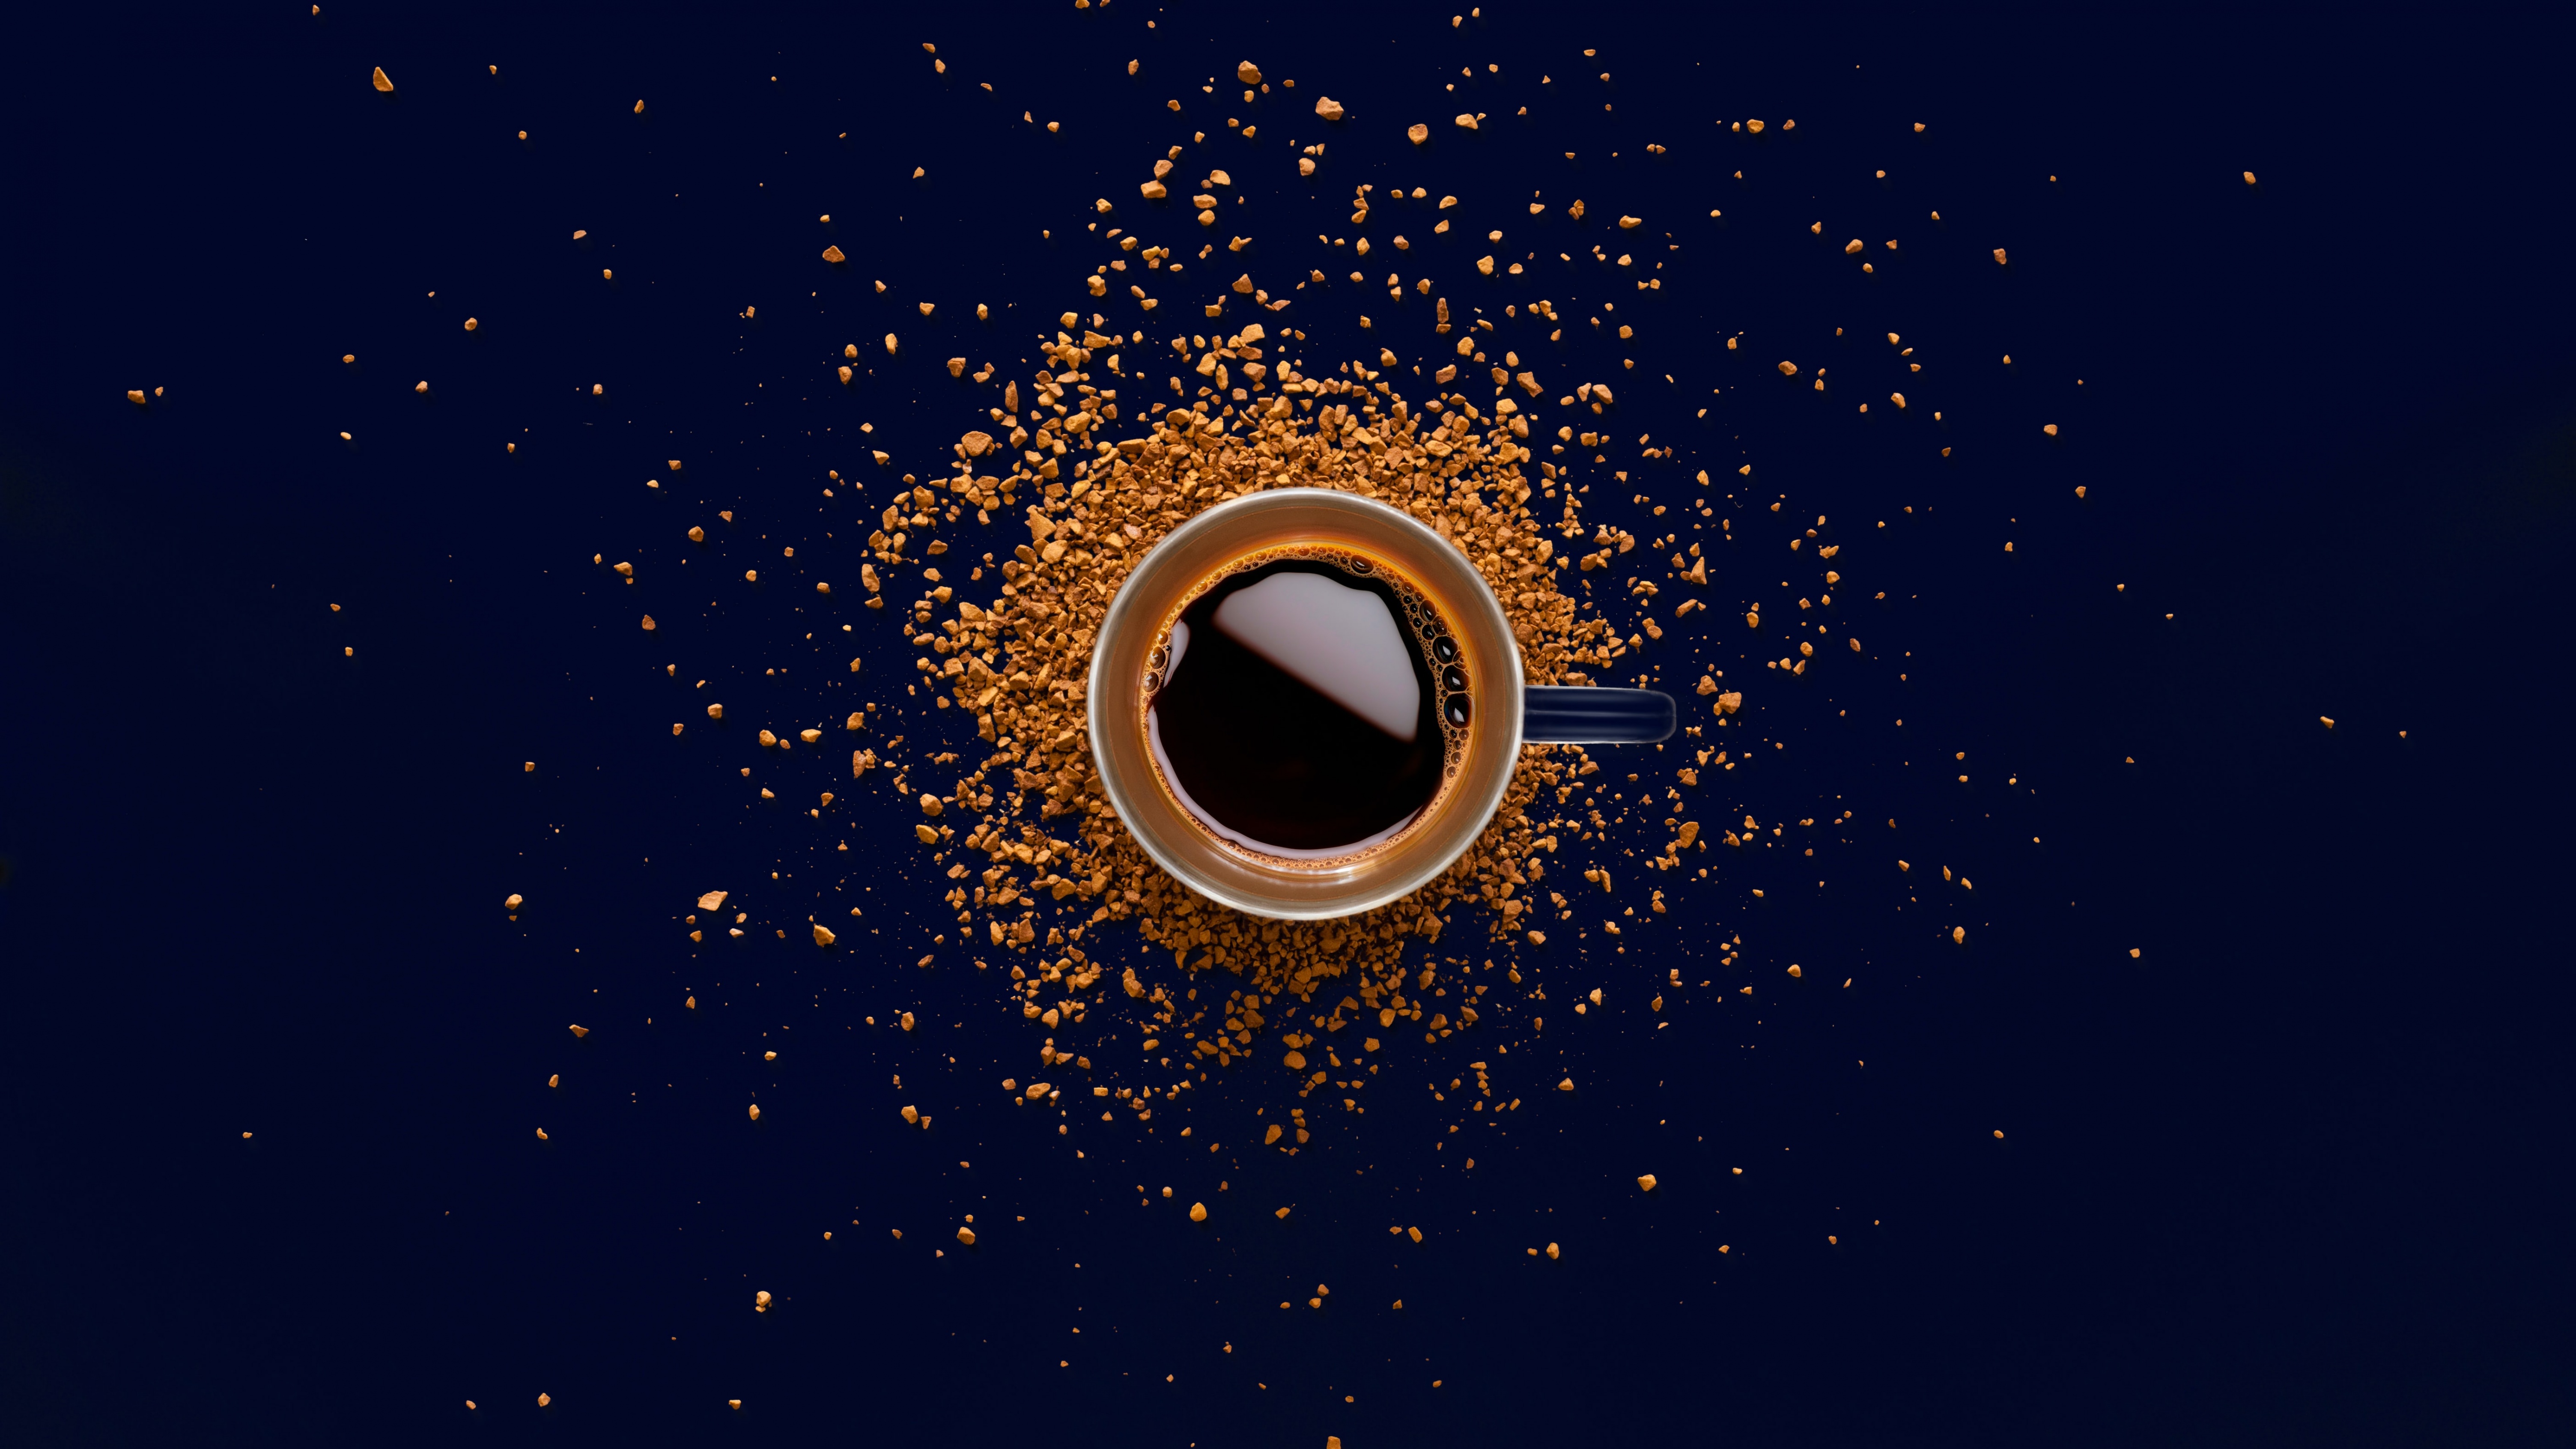 Coffee cup Wallpaper 4K, Instant Coffee, Food, #3327